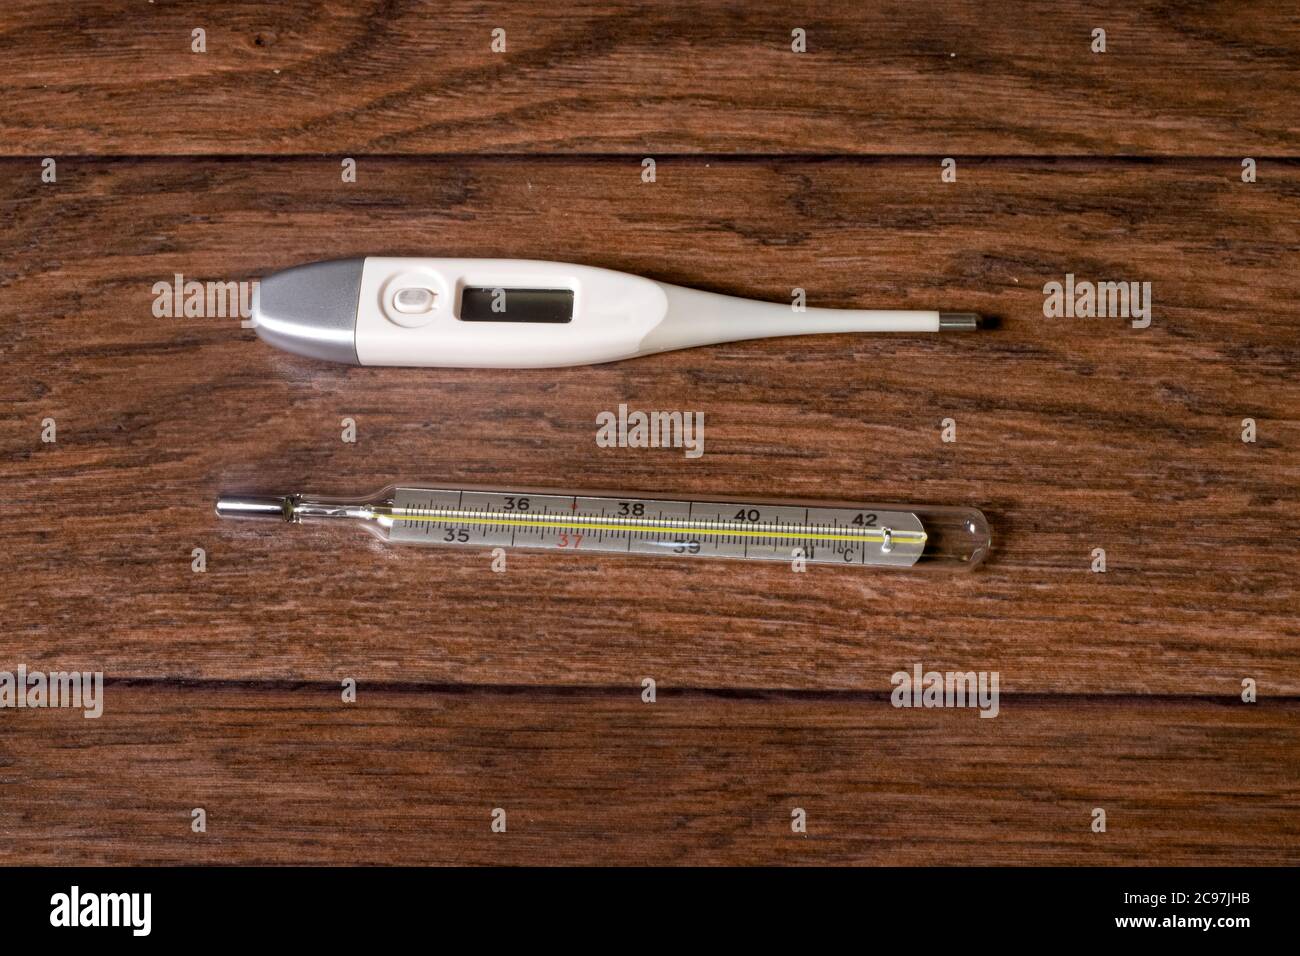 https://c8.alamy.com/comp/2C97JHB/electronic-and-mercury-thermometers-for-measuring-temperature-on-a-brown-wooden-background-a-method-for-diagnosing-fever-2C97JHB.jpg